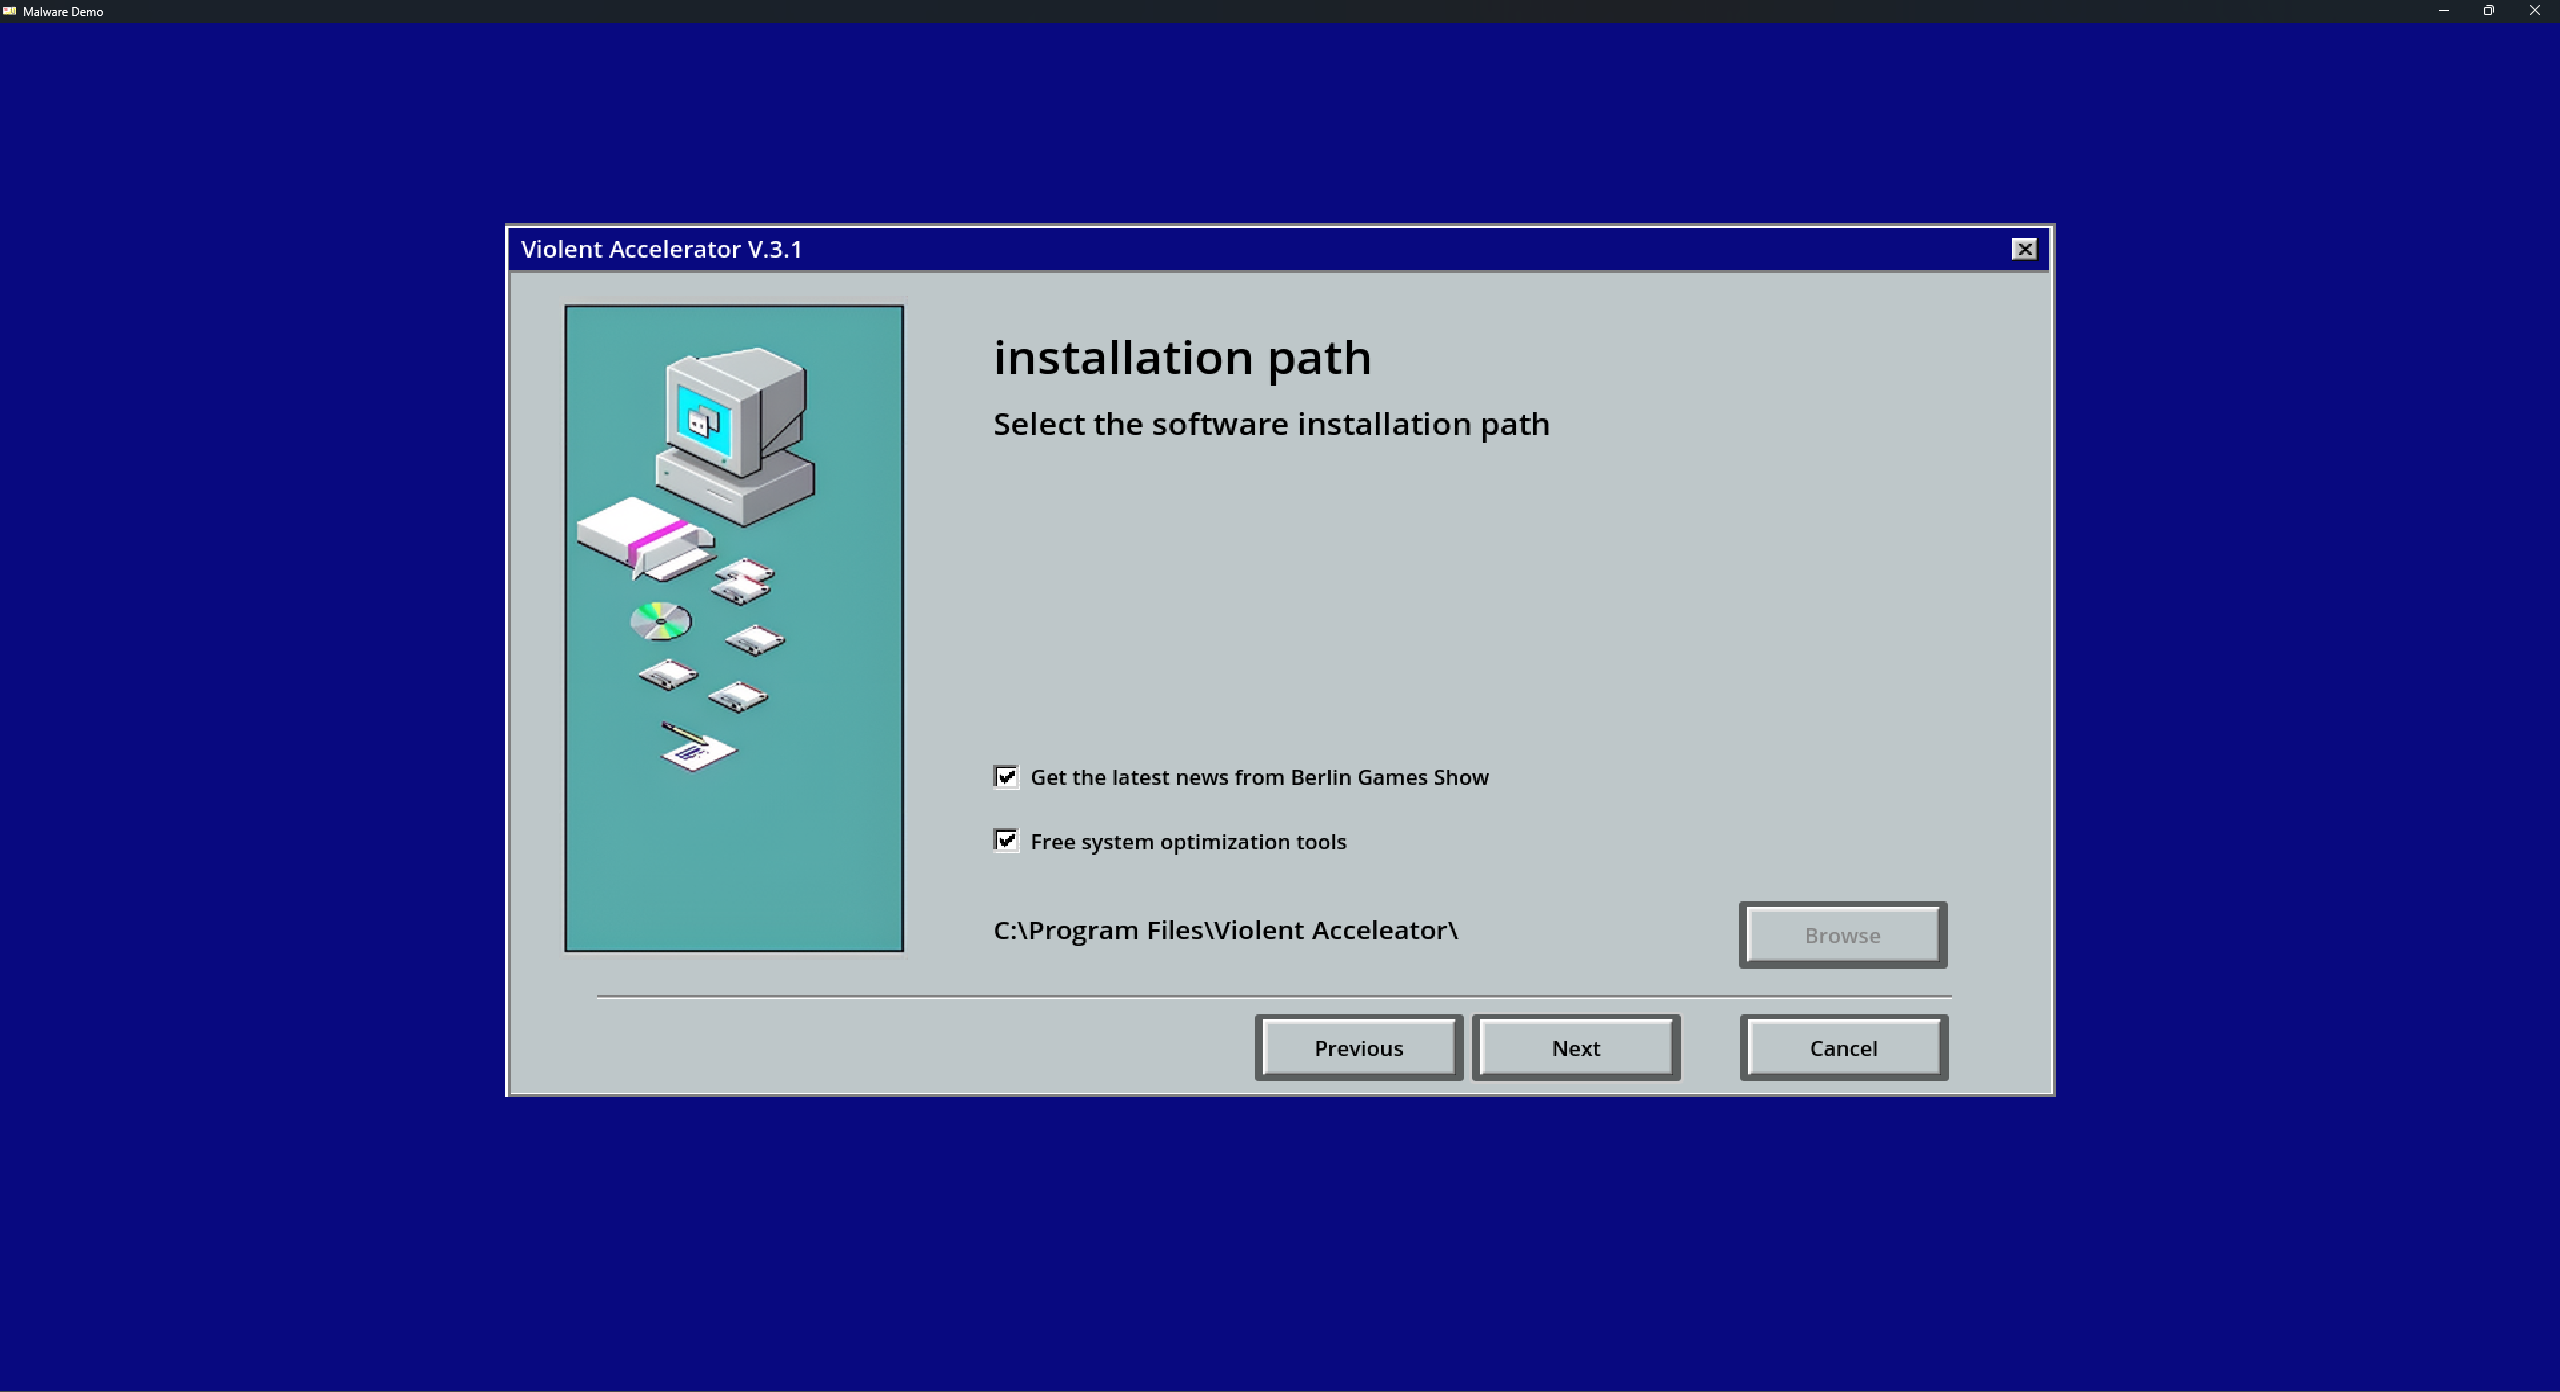 A fake installation wizard in the game Malware, with multiple tickboxes to install malicious additional programs.